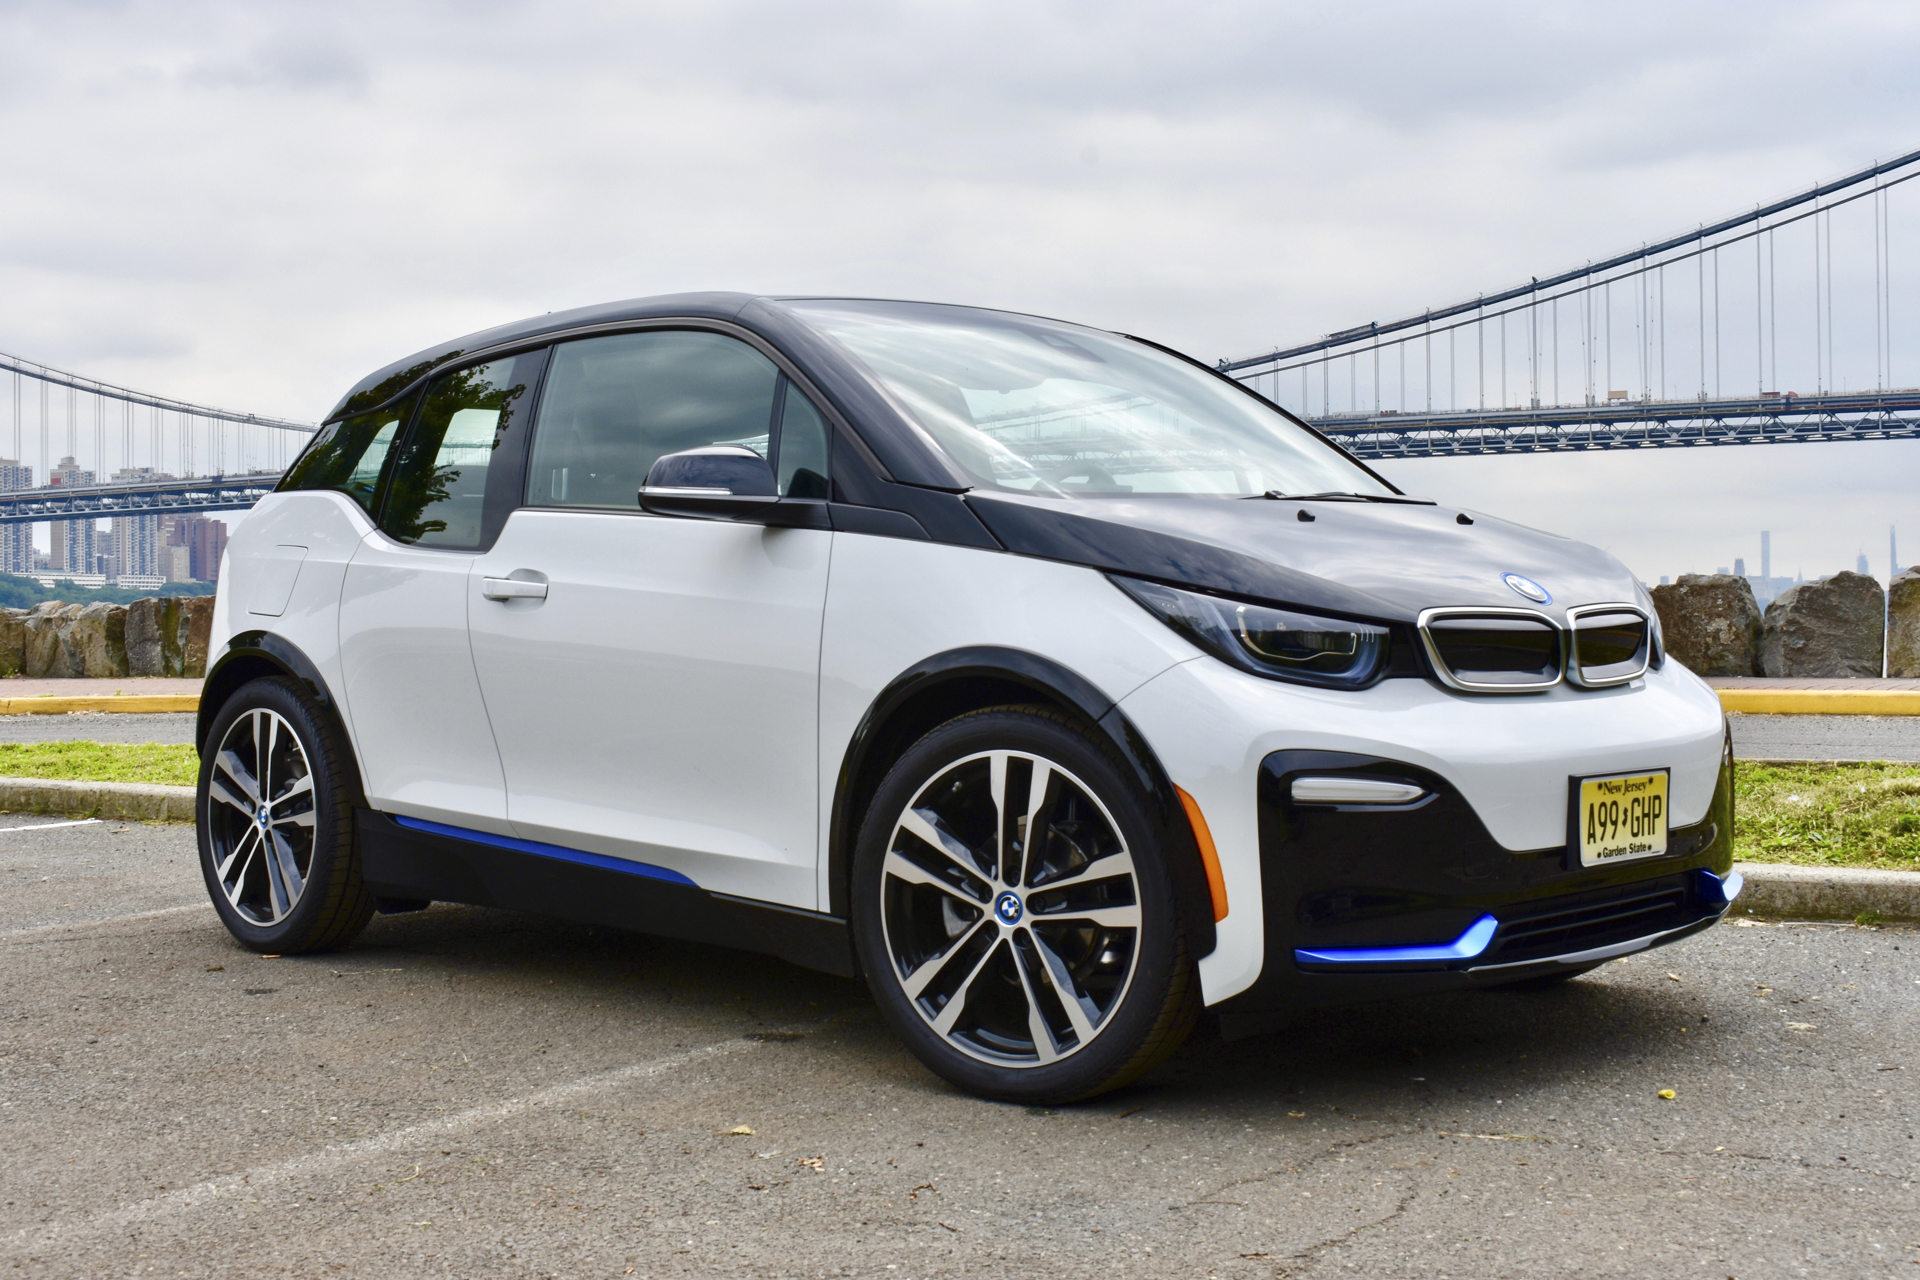 BMW 3 series long wheelbase gets electric i3 variant